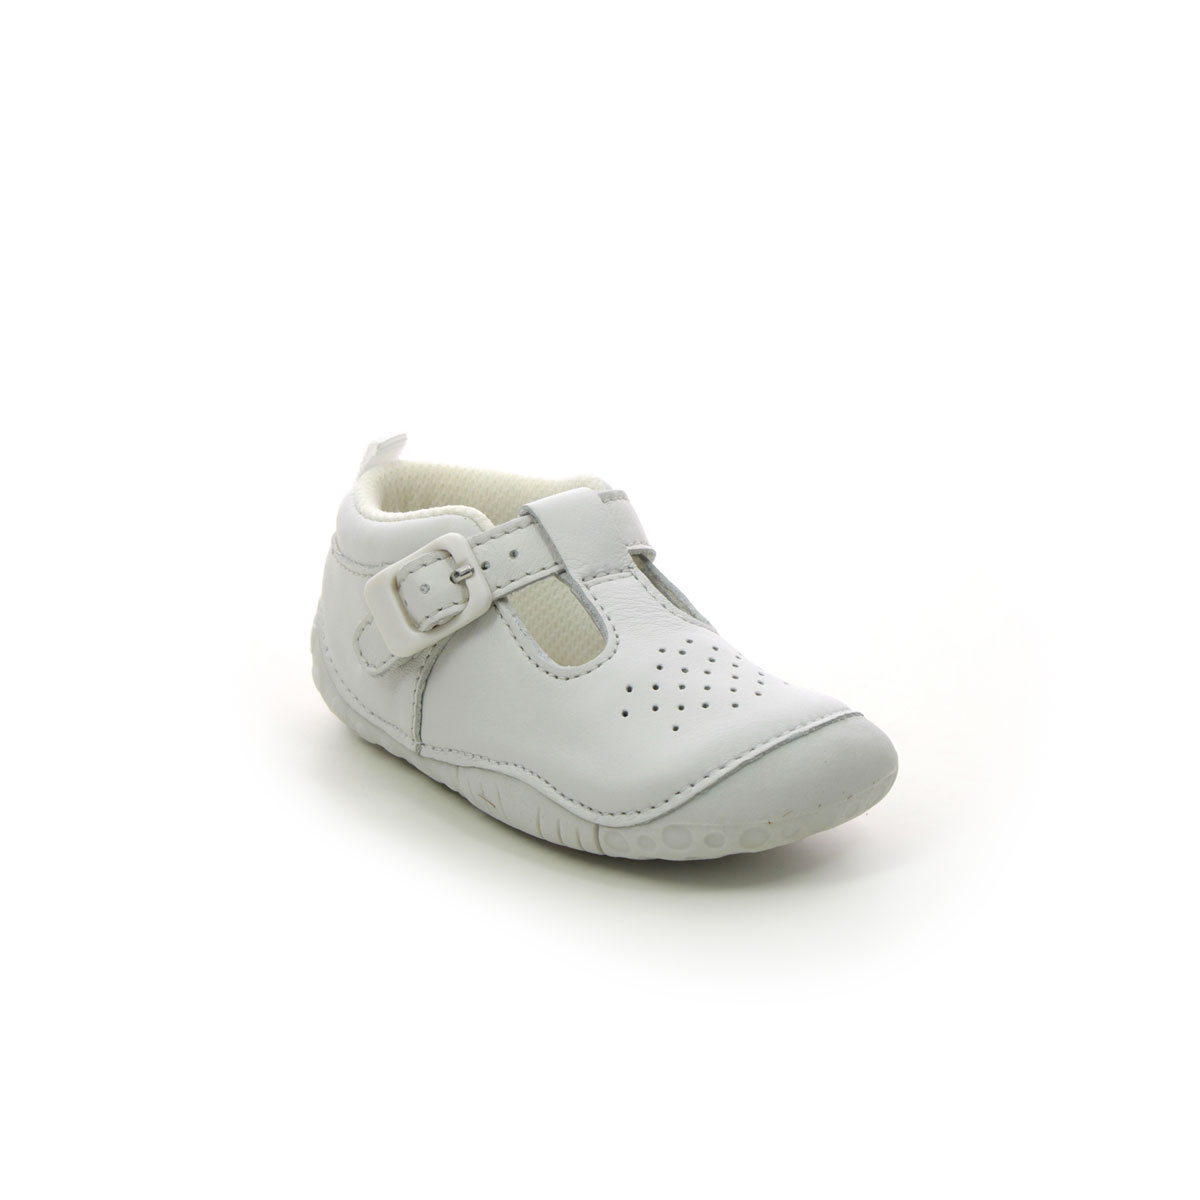 Start Rite - Baby Jack In White Leather 0746-76F In Size 3 In Plain White Leather Boys First And Toddler Shoes  In White Leather For kids